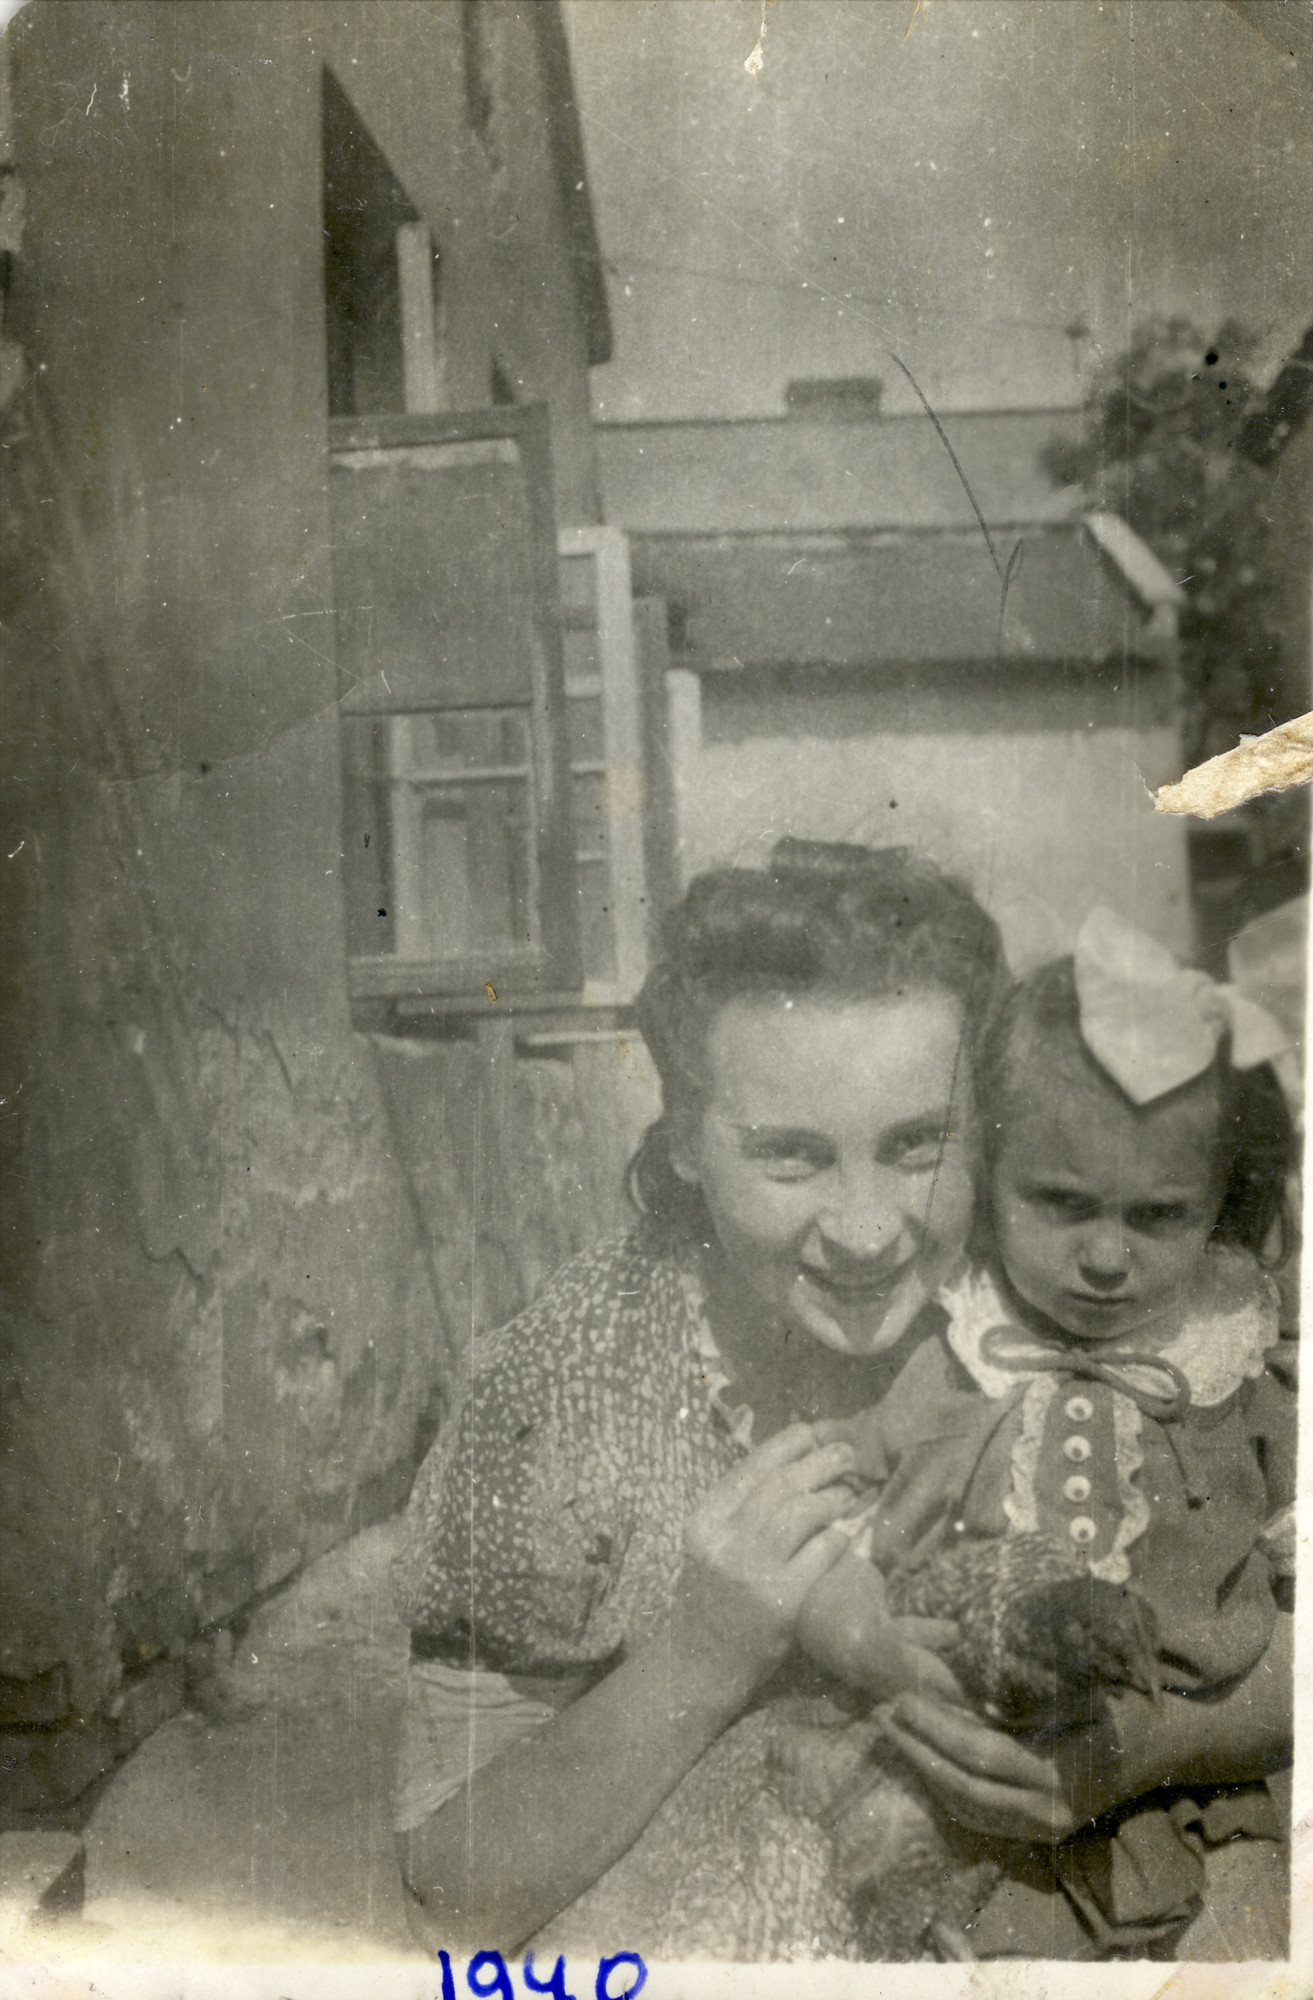 Adela Alterman and her daughter, Leah pose in Ostrowiec prior to going into hiding